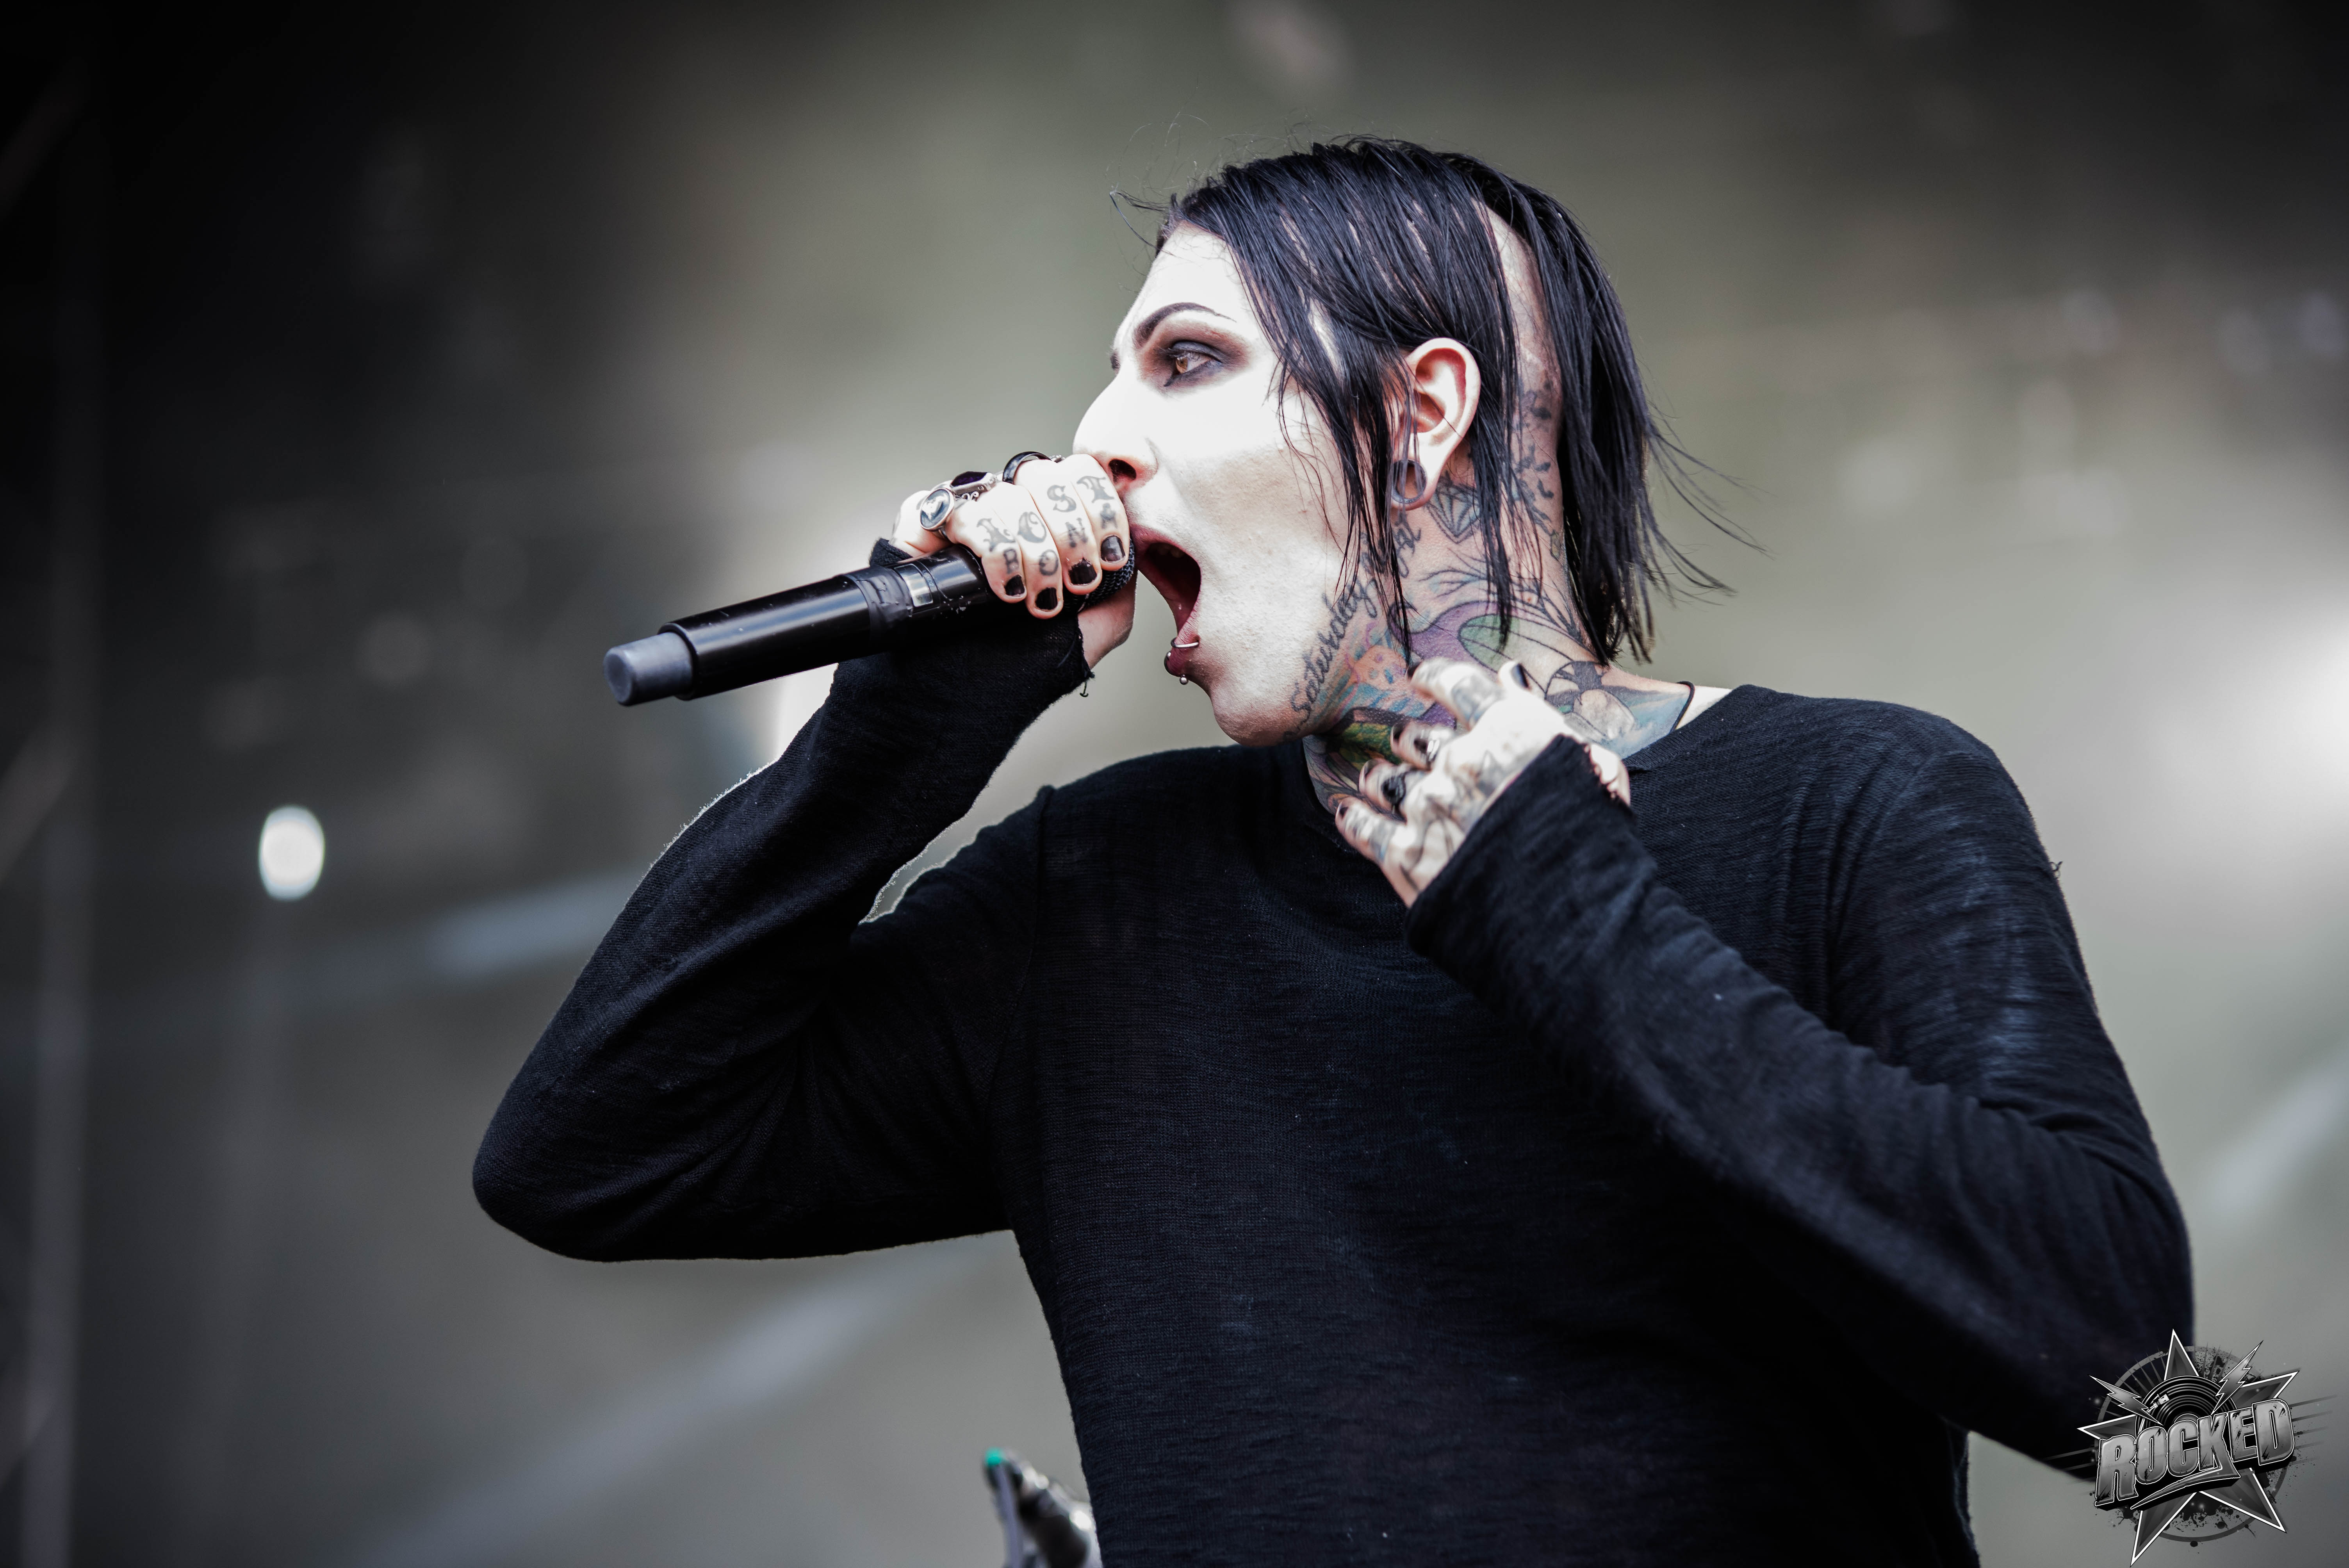 Chris motionless quotes